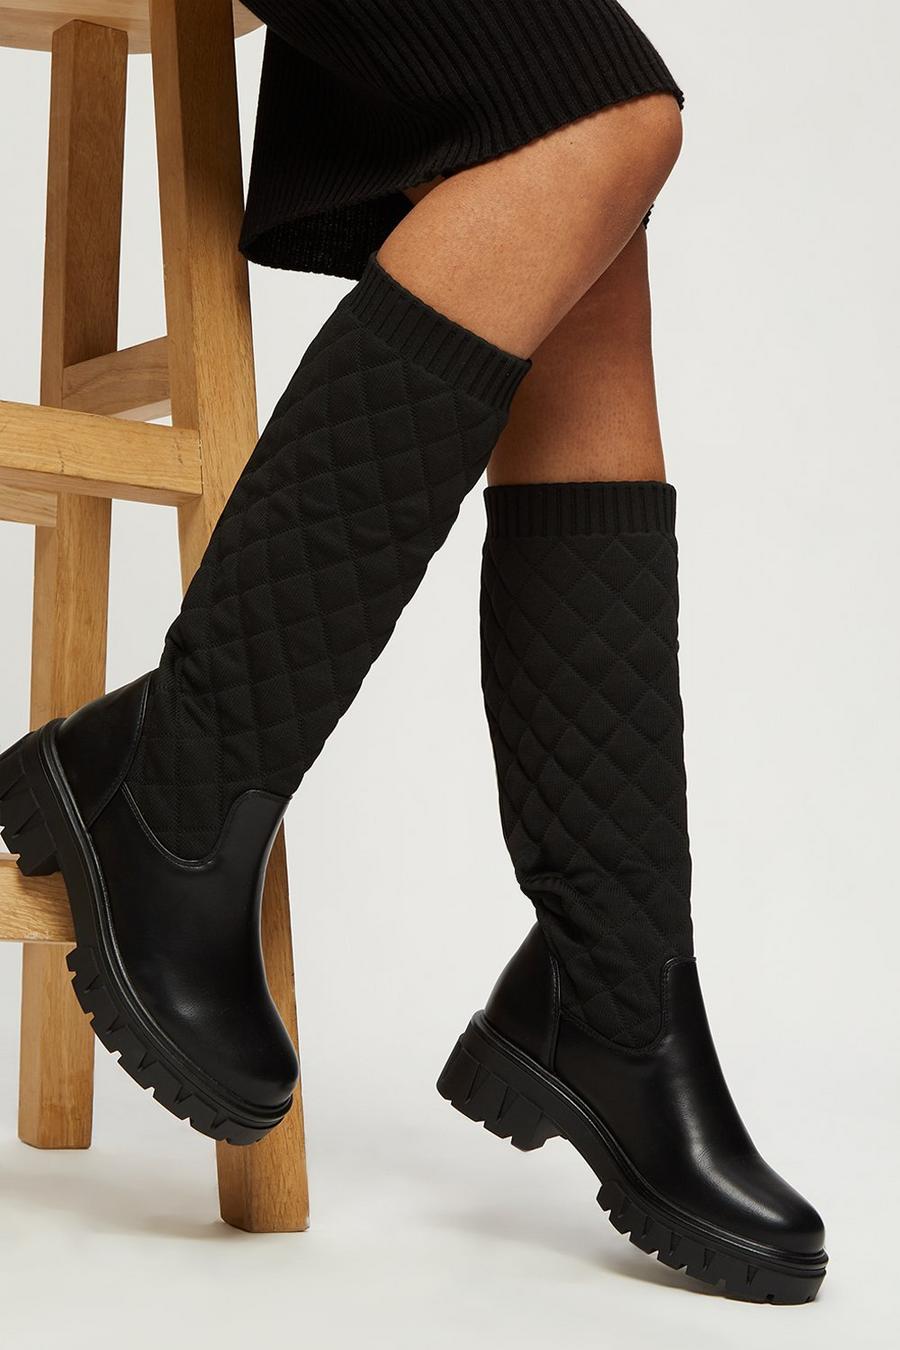 Tori Quilted Knee High Boots